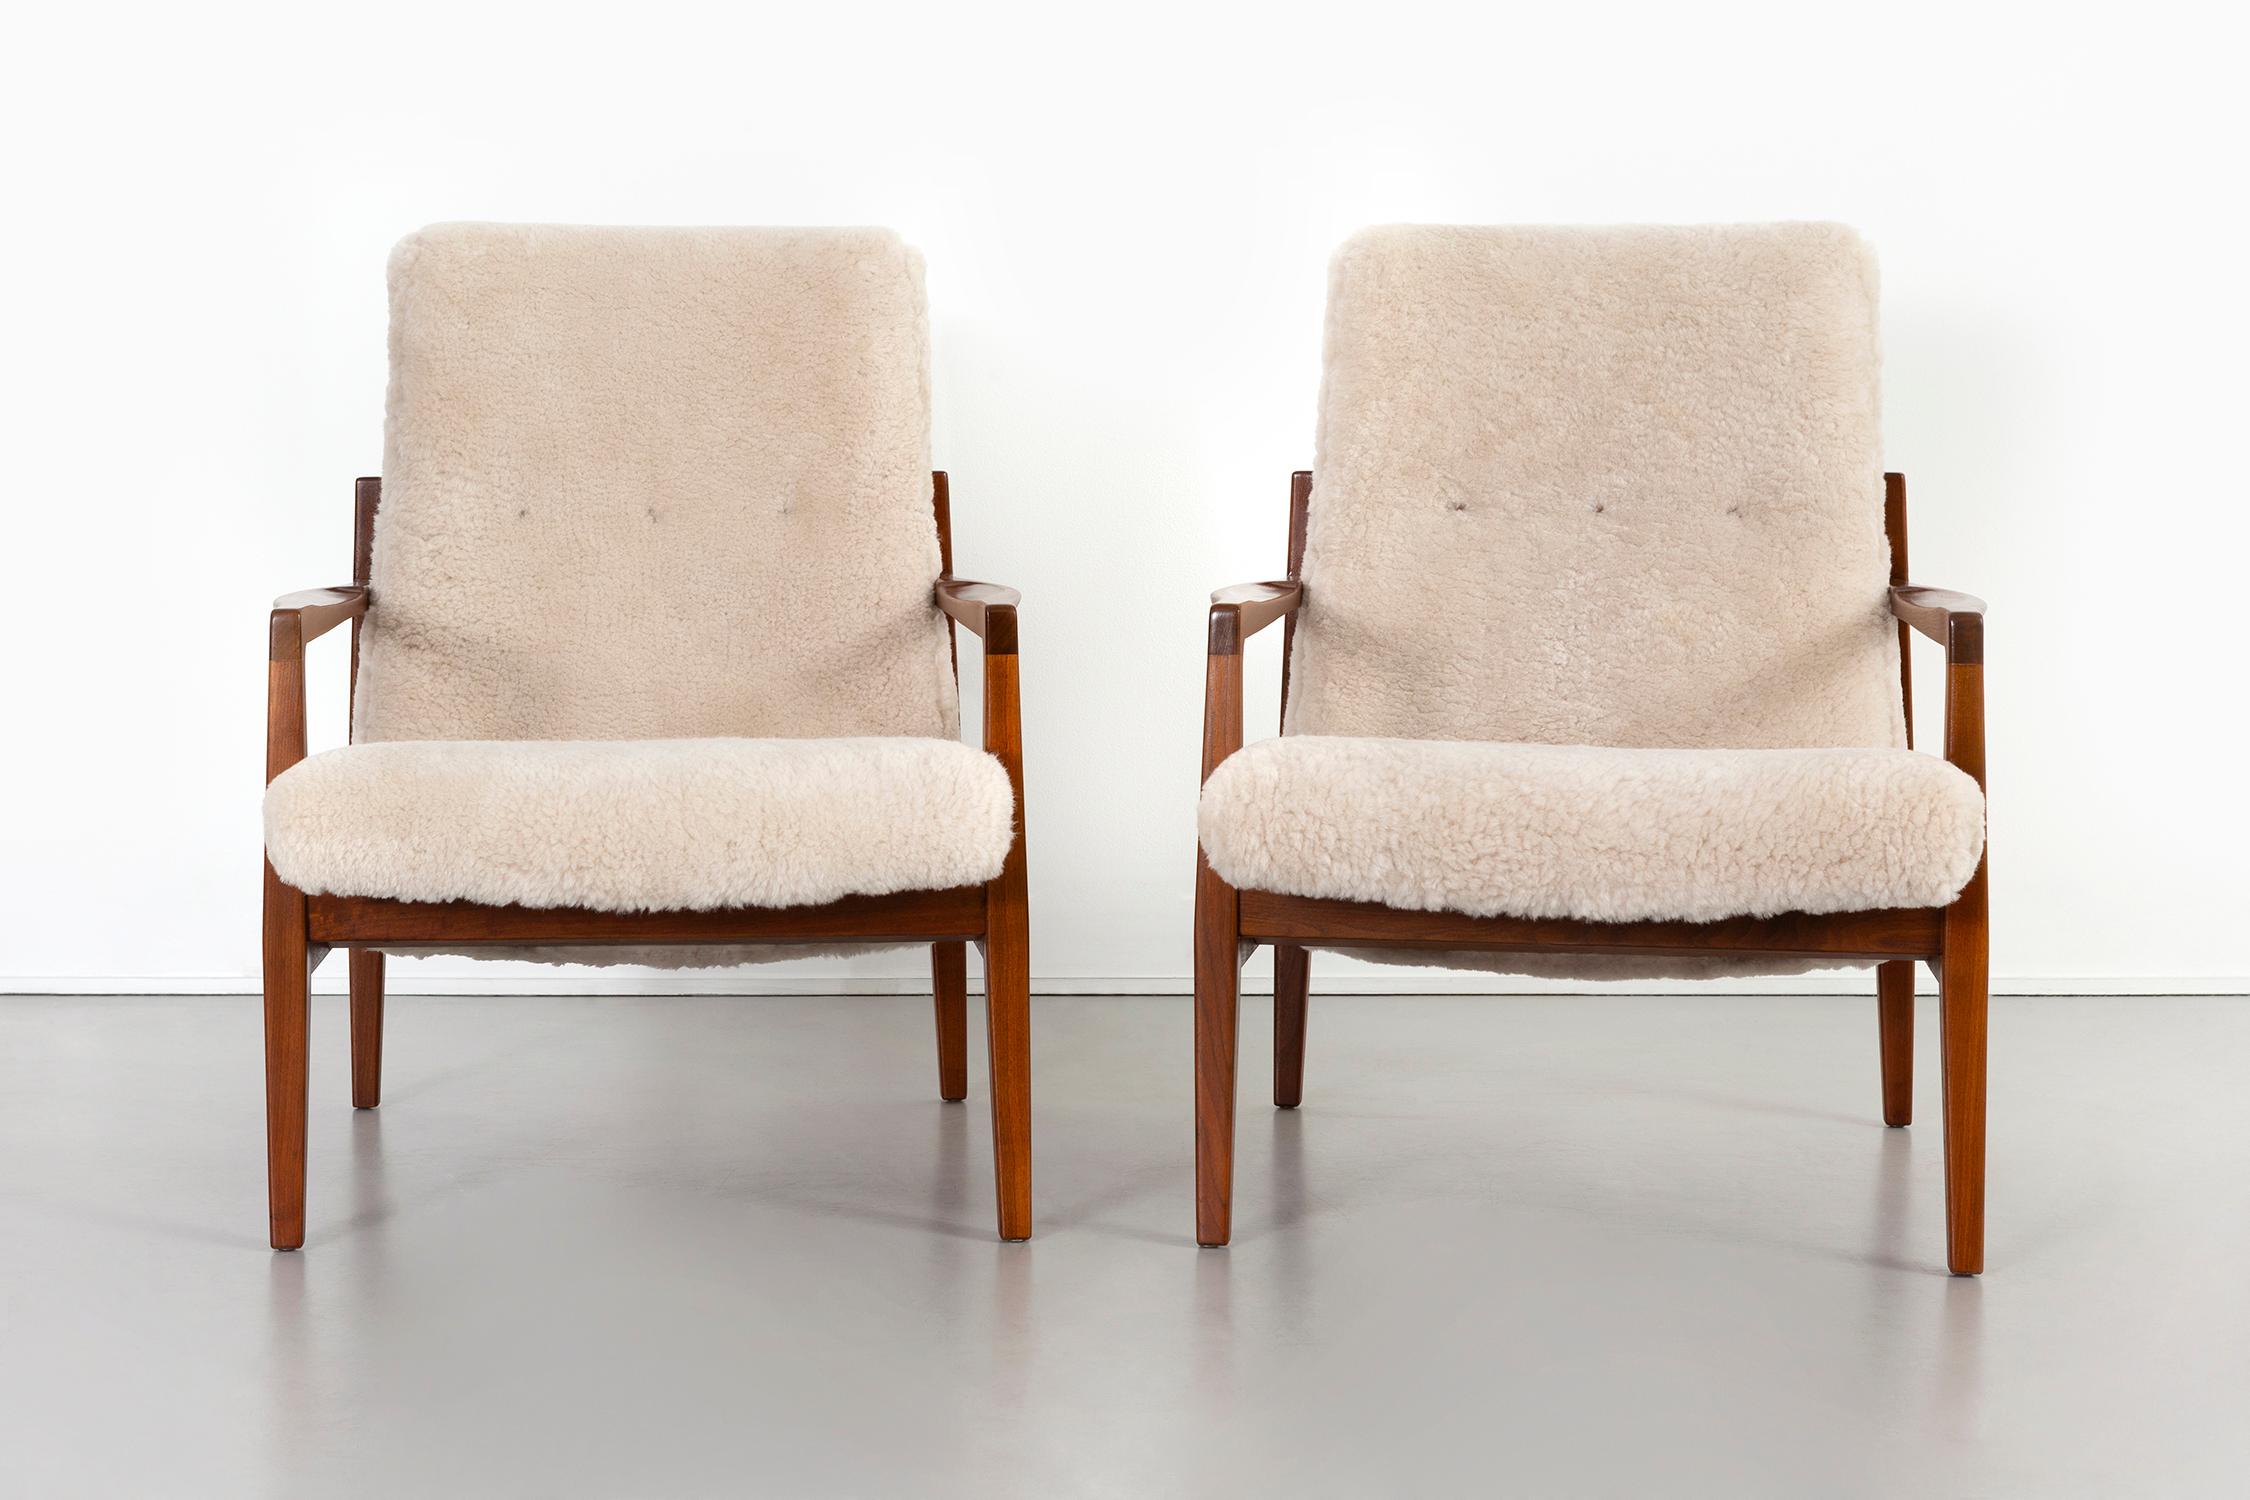 Set of lounge chairs 

Designed by Jens Risom 

USA, circa 1950s

Reupholstered in shearling and refinished walnut frames.

Measures: 35” H x 27 ¾” W x 31 ¼” D x seat 14 ½” H.
 